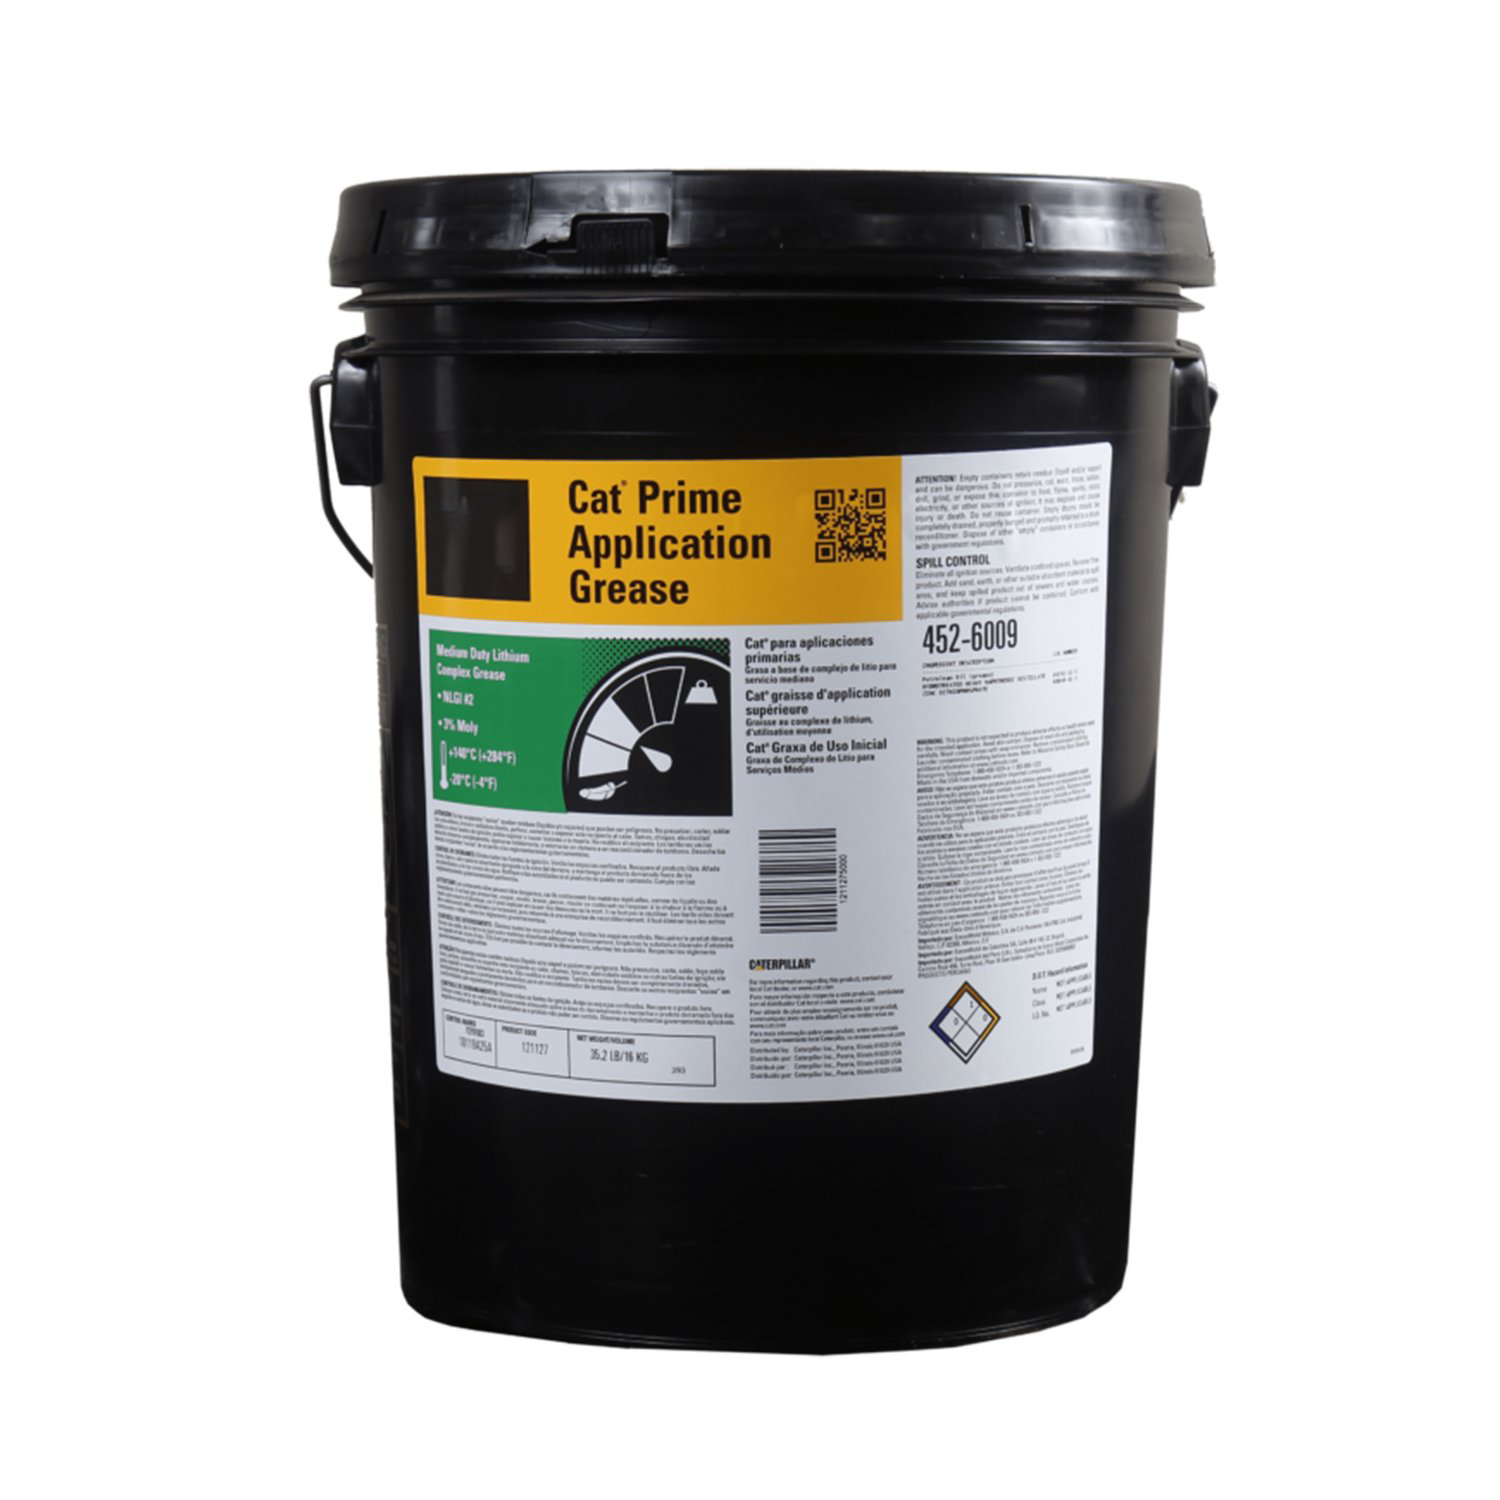 Grease _ Cat Prime Application Grease _ NLGI 2 _EP 2_ _ 452 6009 _16KG _ Pail_